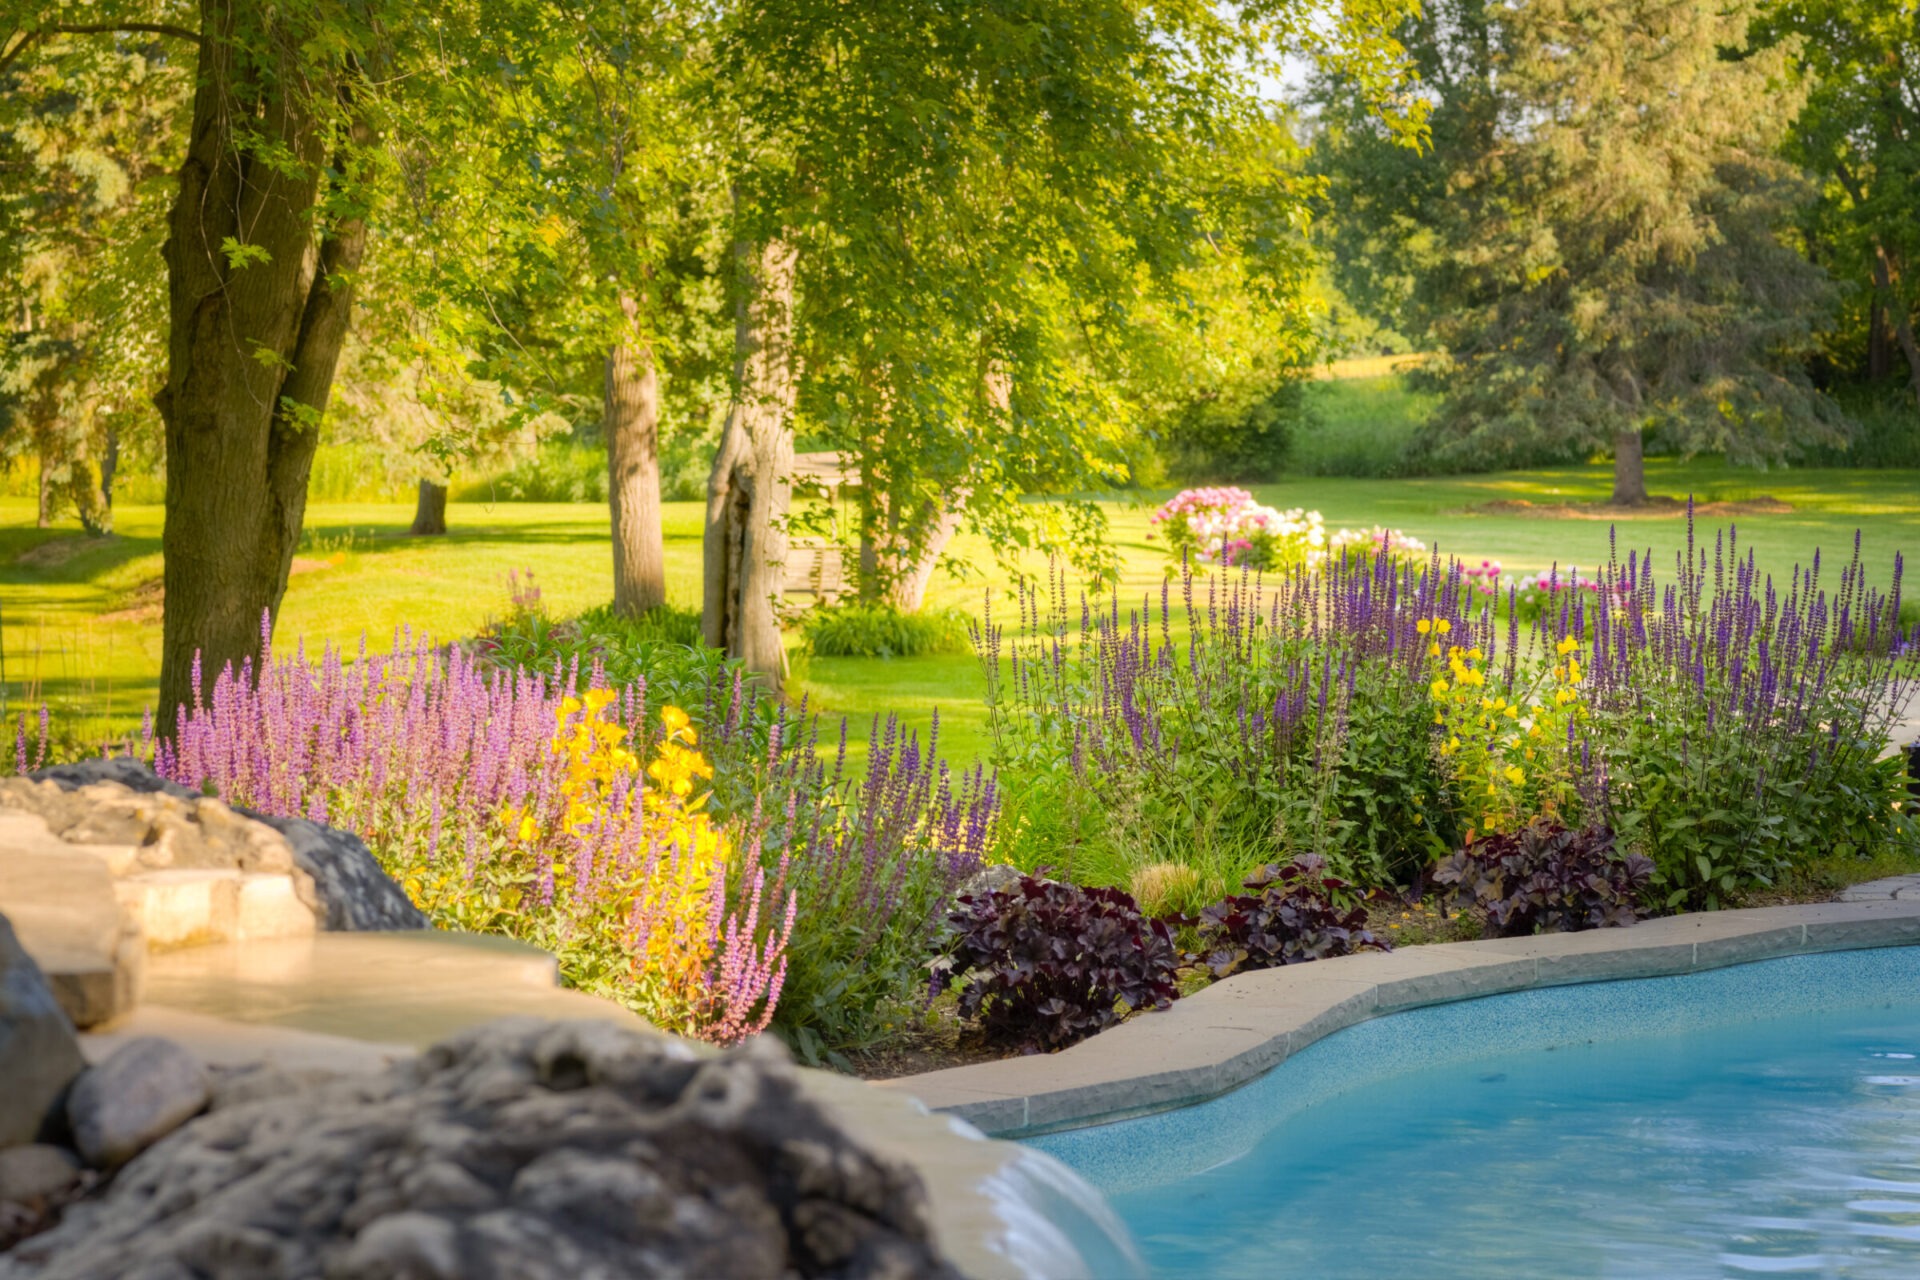 A serene garden with vibrant purple and yellow flowers, lush trees, and part of a blue pool in the foreground, suggesting a tranquil, natural setting.